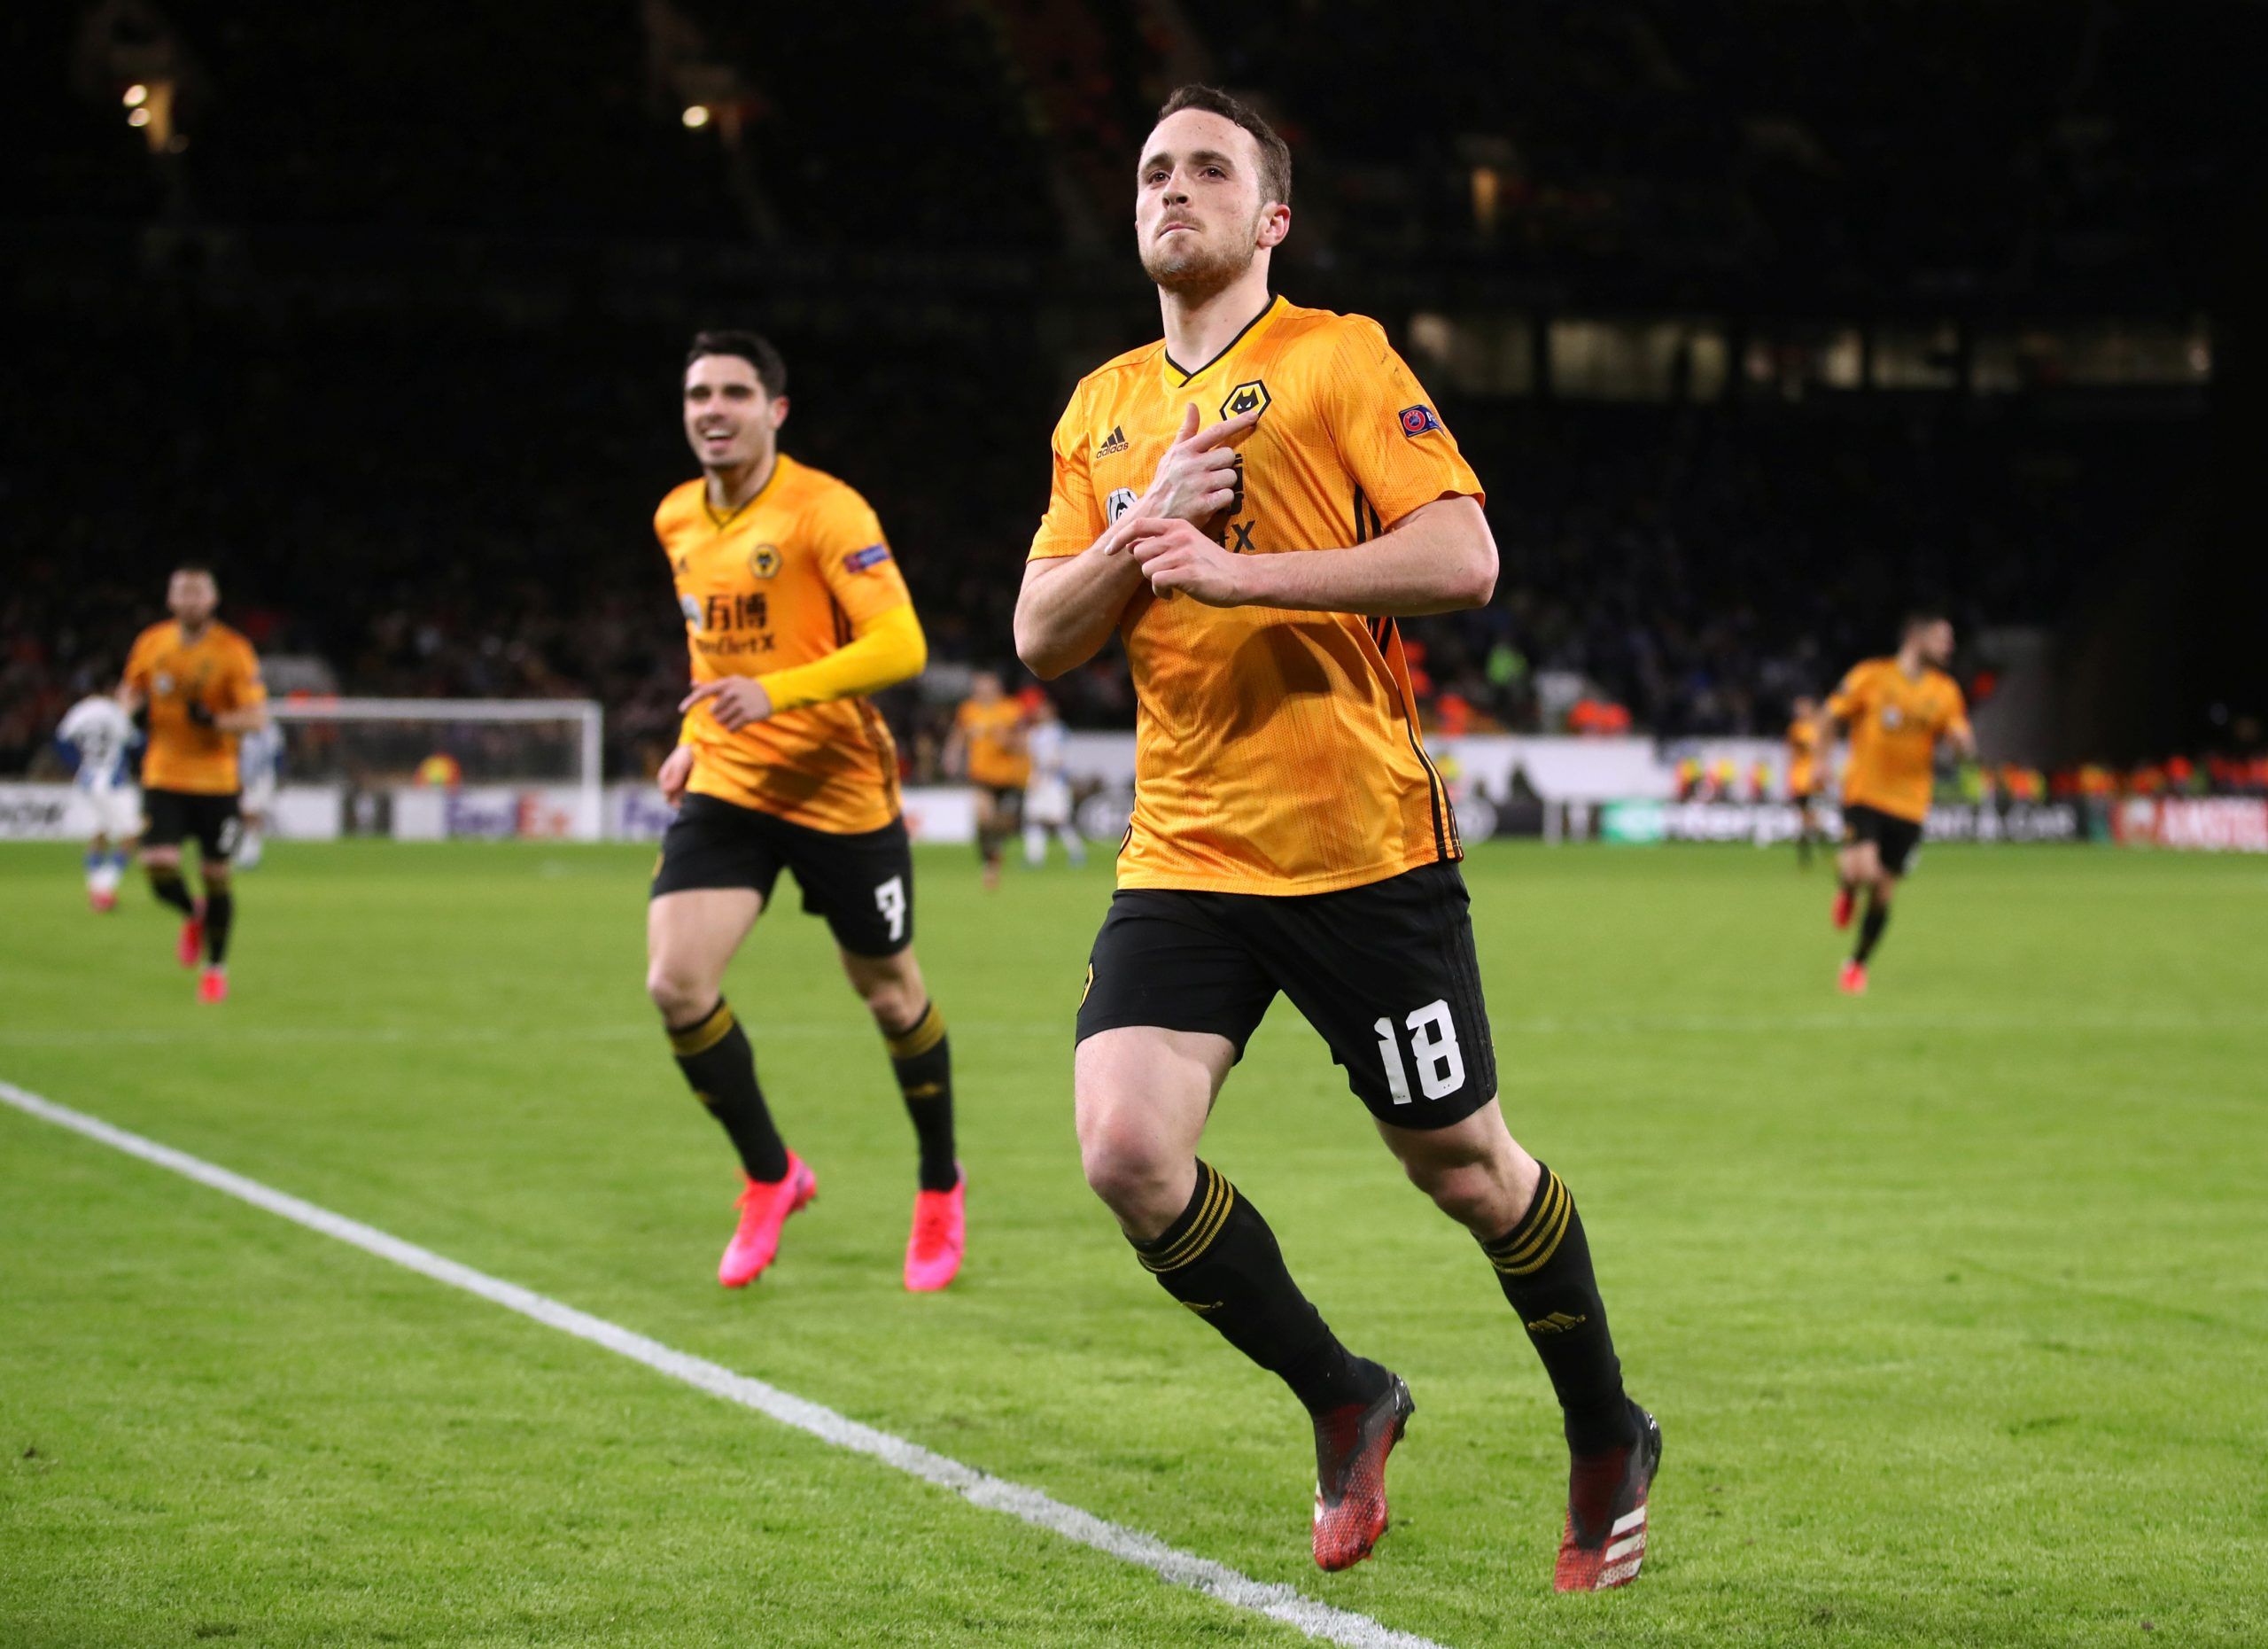 Soccer Football - Europa League - Round of 32 First Leg - Wolverhampton Wanderers v Espanyol - Molineux Stadium, Wolverhampton, Britain - February 20, 2020   Wolverhampton Wanderers' Diogo Jota celebrates scoring their fourth goal and completing his hat-trick   Action Images via Reuters/Carl Recine